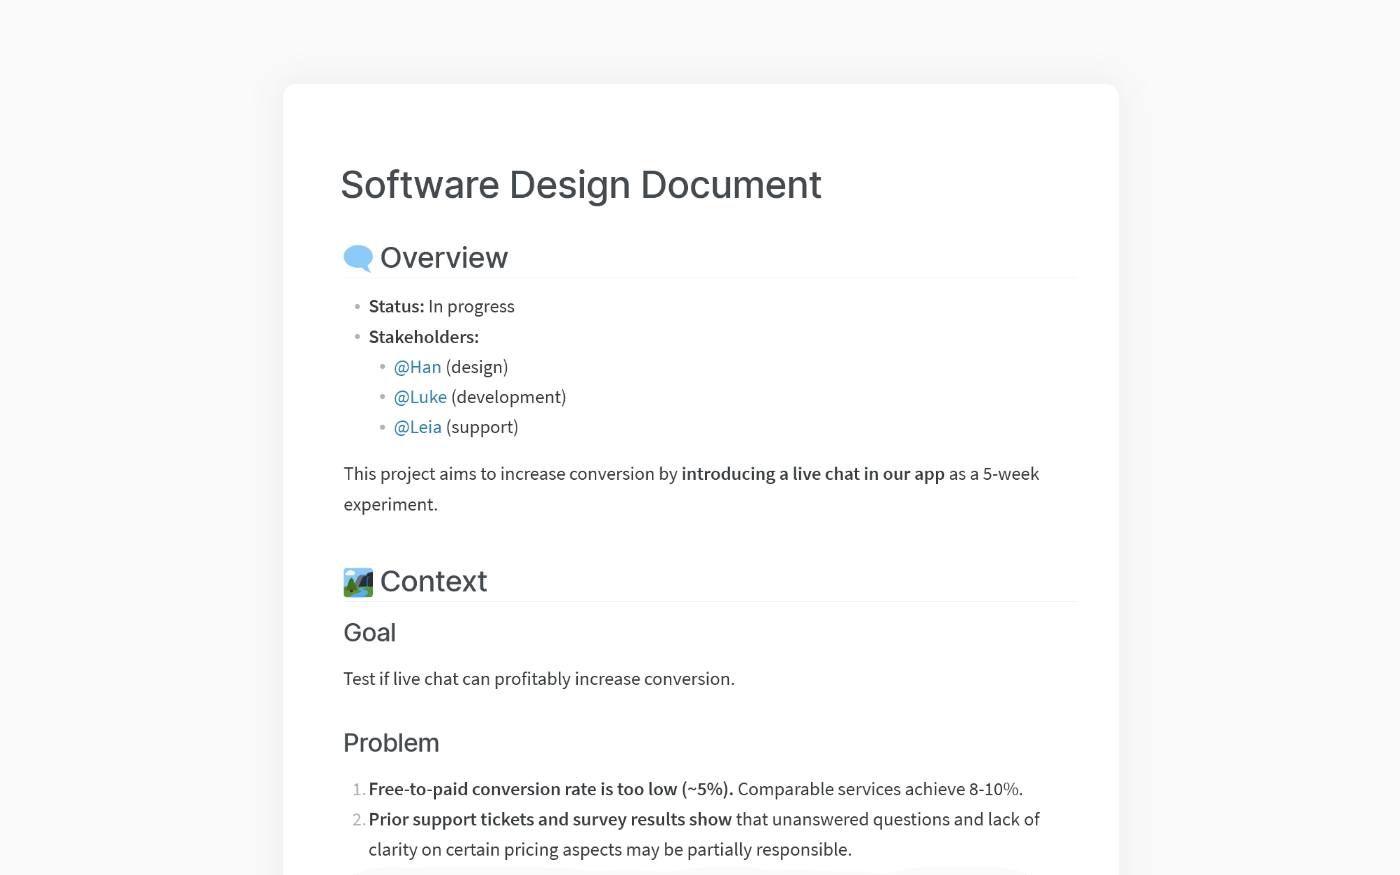 How To Write A Software Design Document (SDD) With System Analysis And Design Document Template